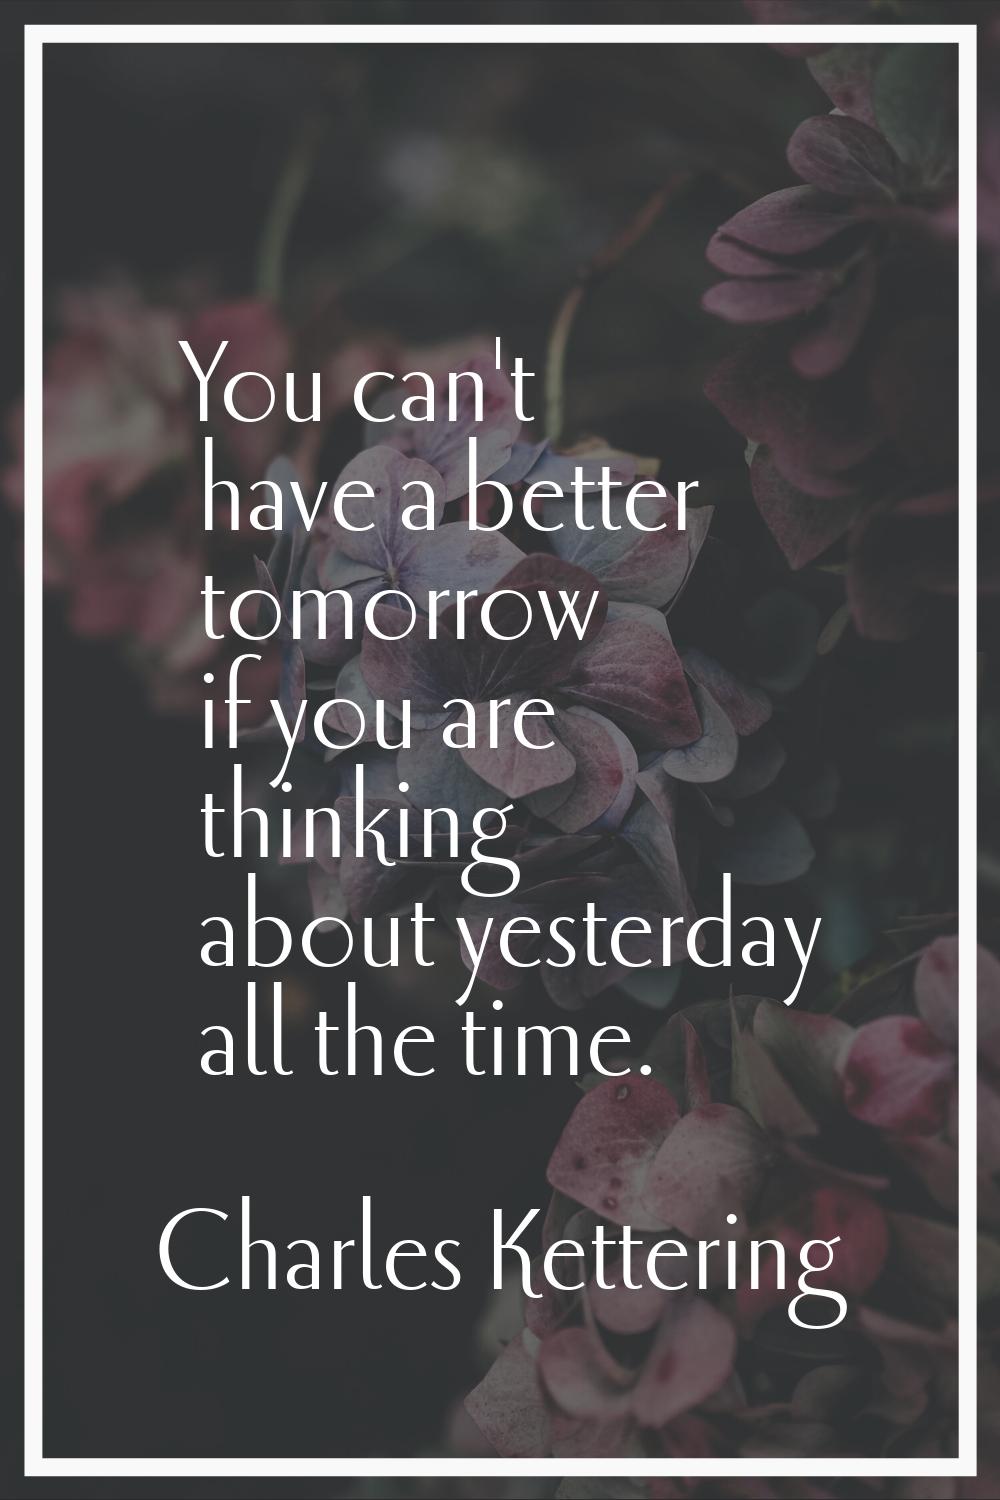 You can't have a better tomorrow if you are thinking about yesterday all the time.